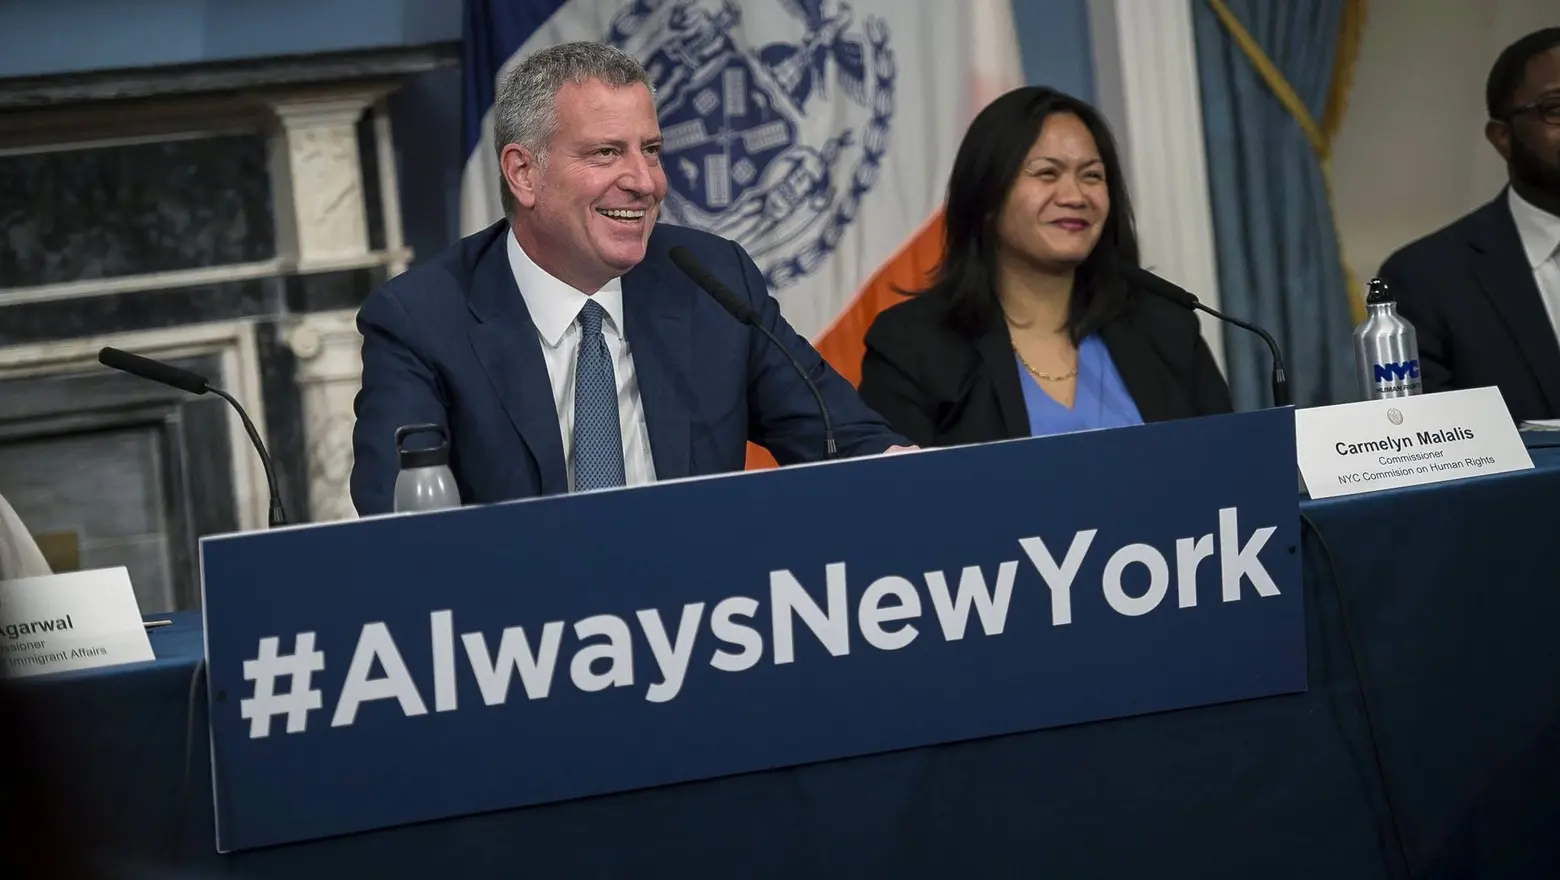 De Blasio defends sanctuary city status, saying withheld funds would be millions, not billions